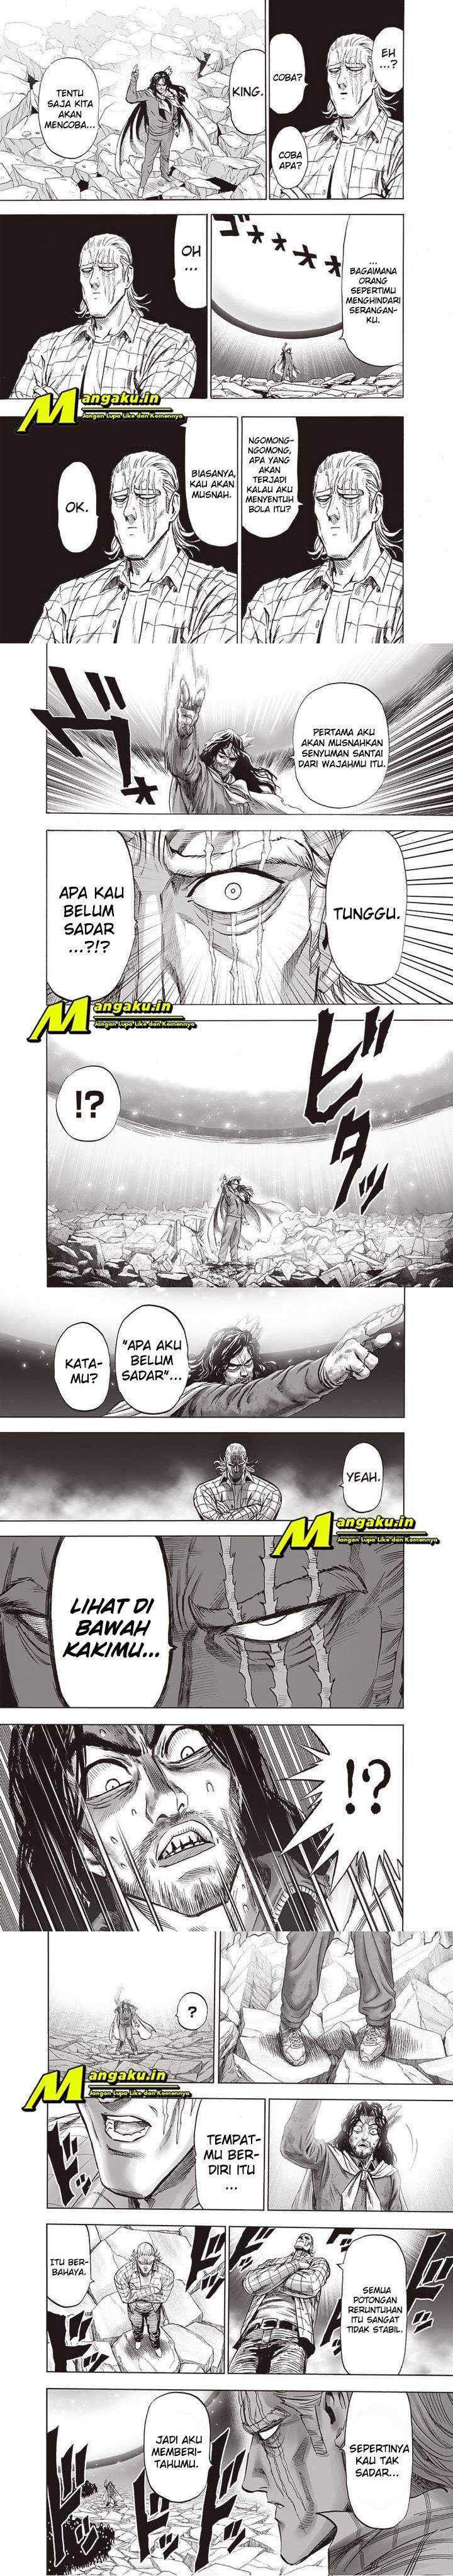 One Punch Man Chapter 206 3